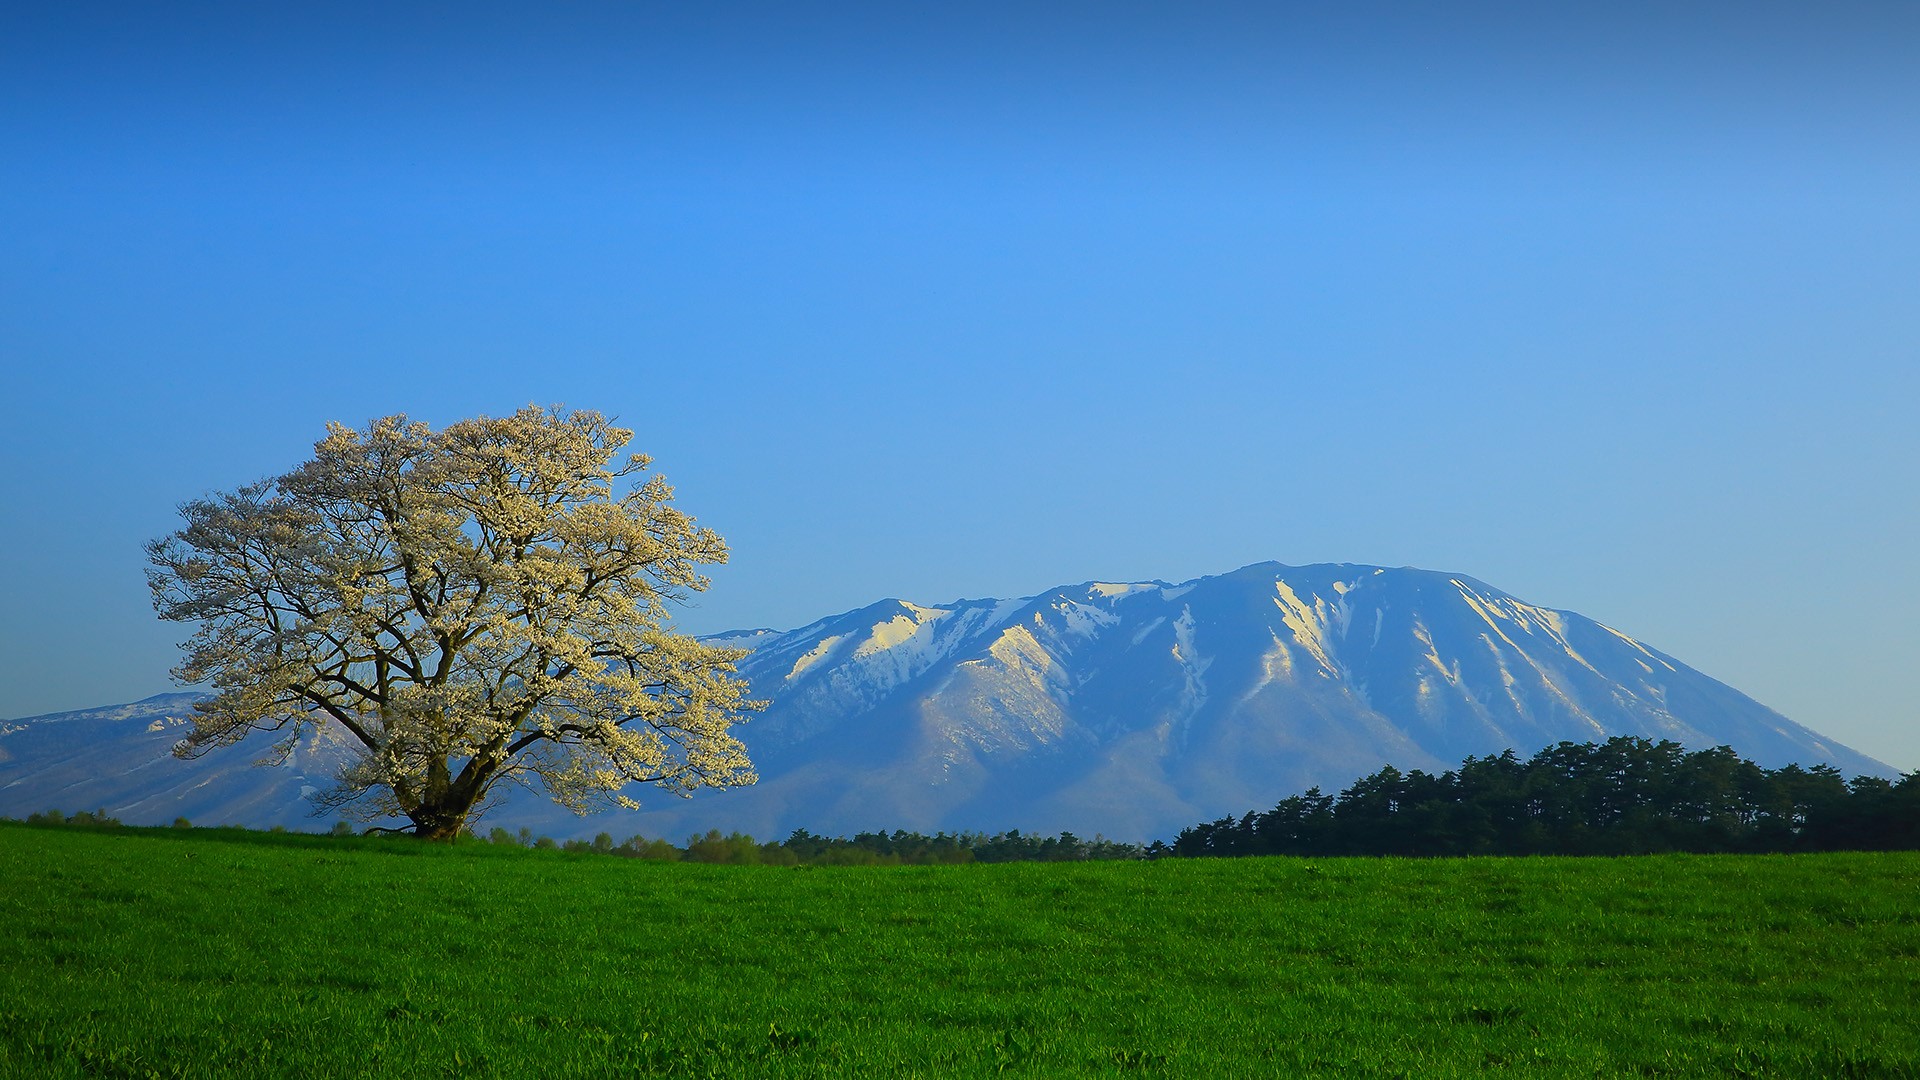 General 1920x1080 grass nature landscape clear sky mountains trees field spring Yoshino cherries Tōhoku Japan